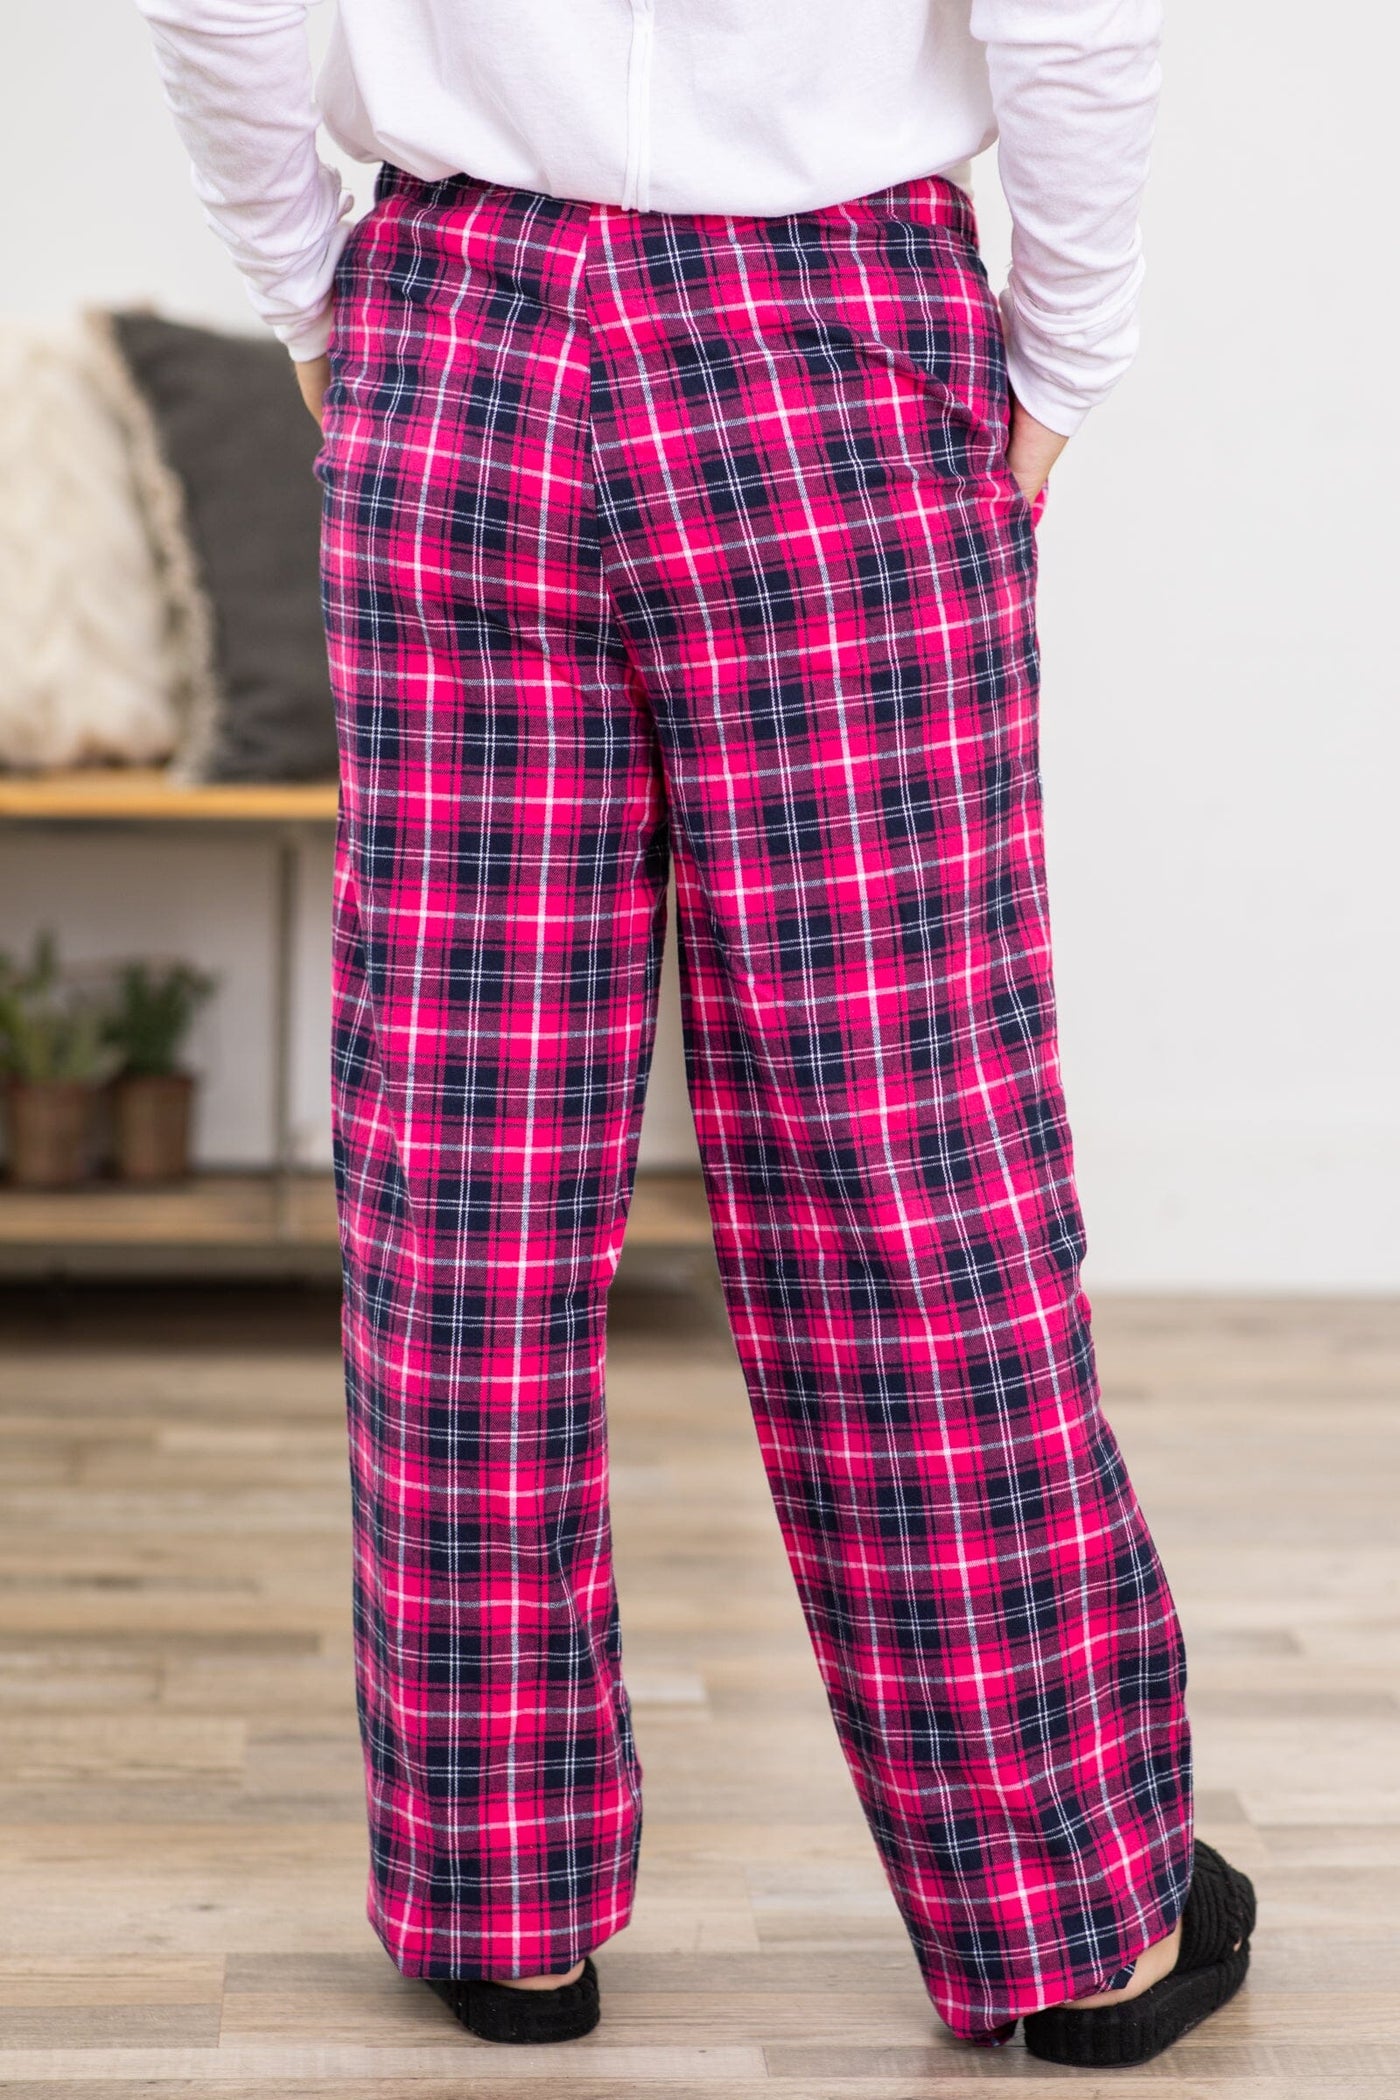 Hot Pink and Navy Plaid Lounge Pants - Filly Flair